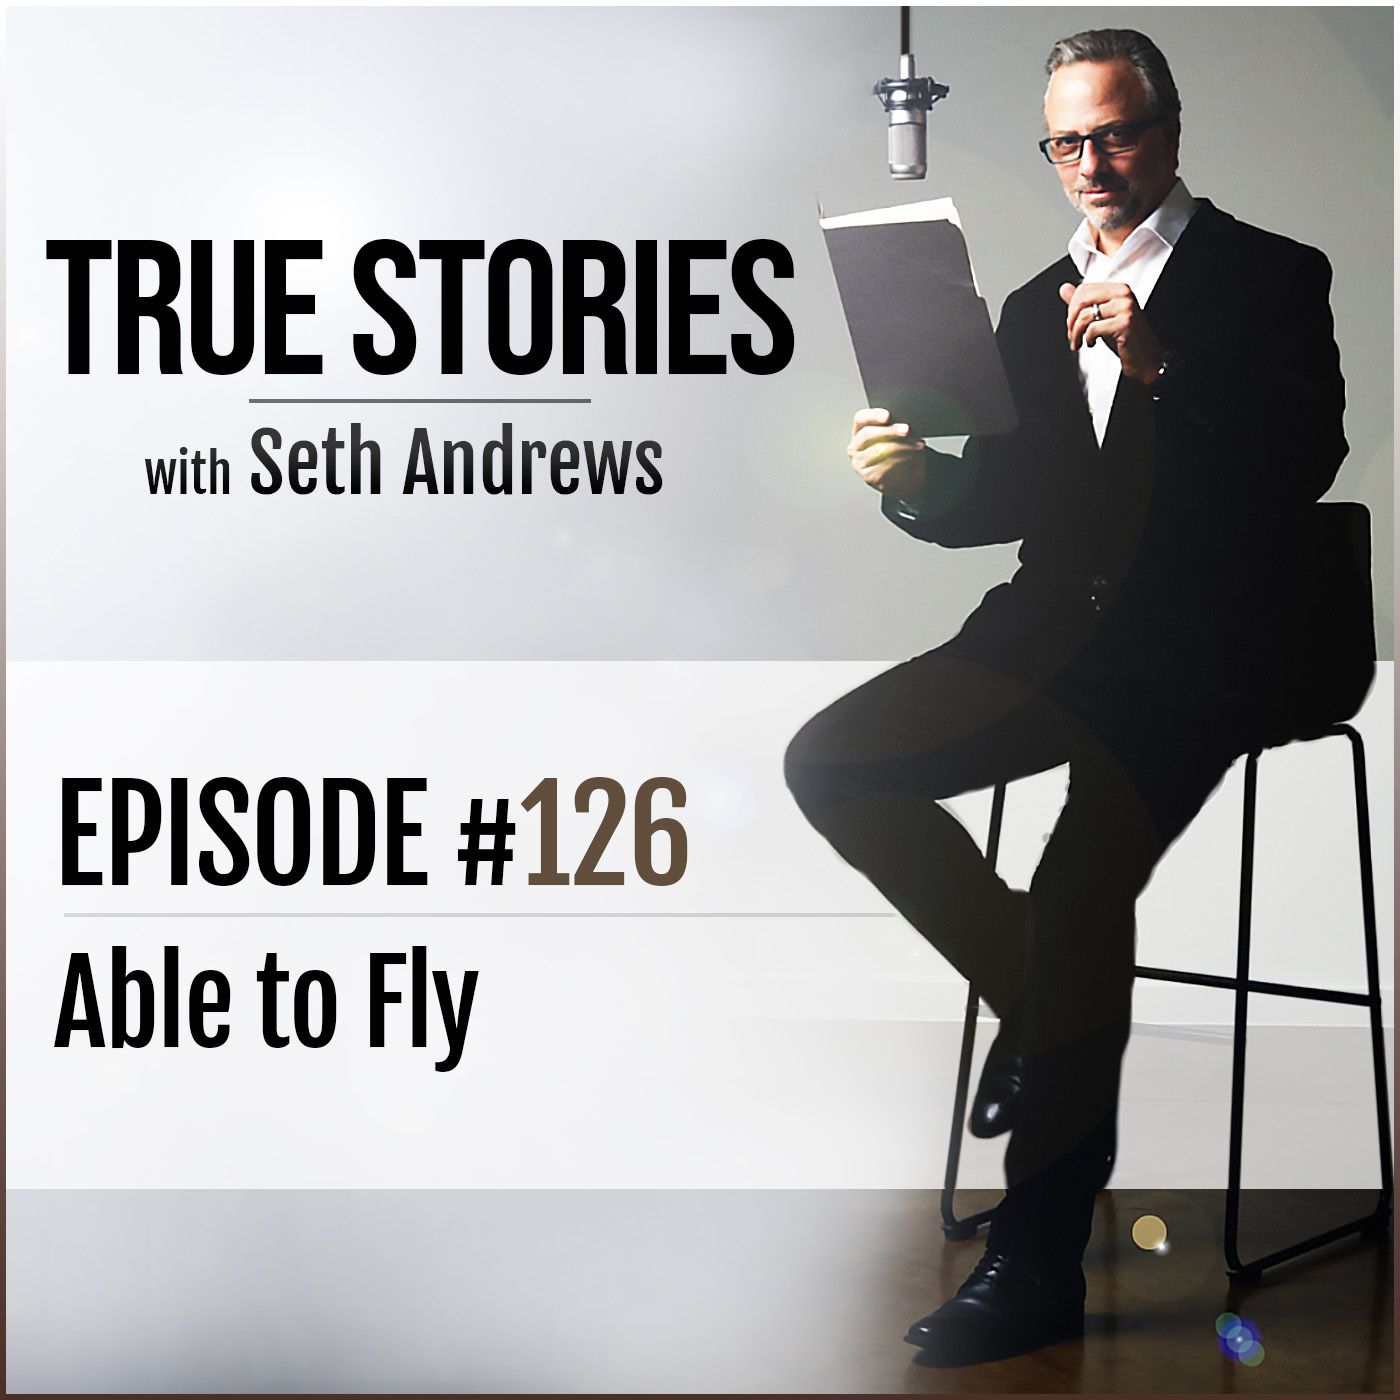 True Stories #126 - Able to Fly